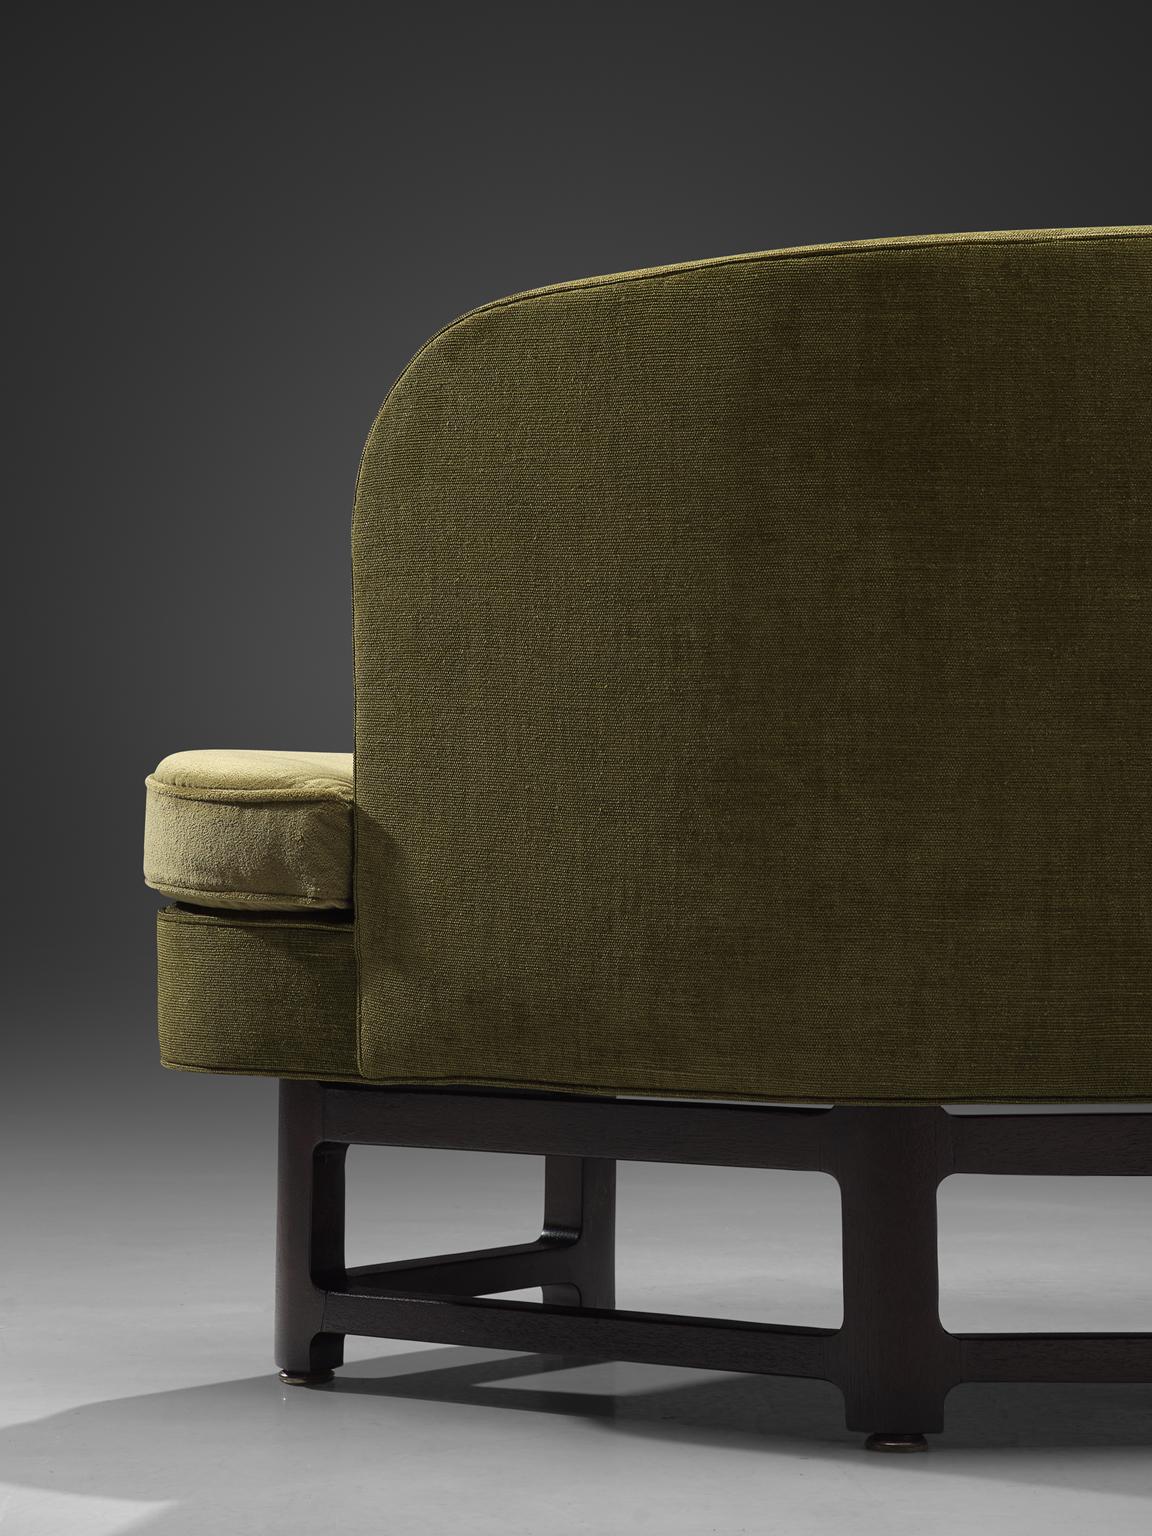 Fabric Edward Wormley Reupholstered 'Janus' Sofa with Green Upholstery